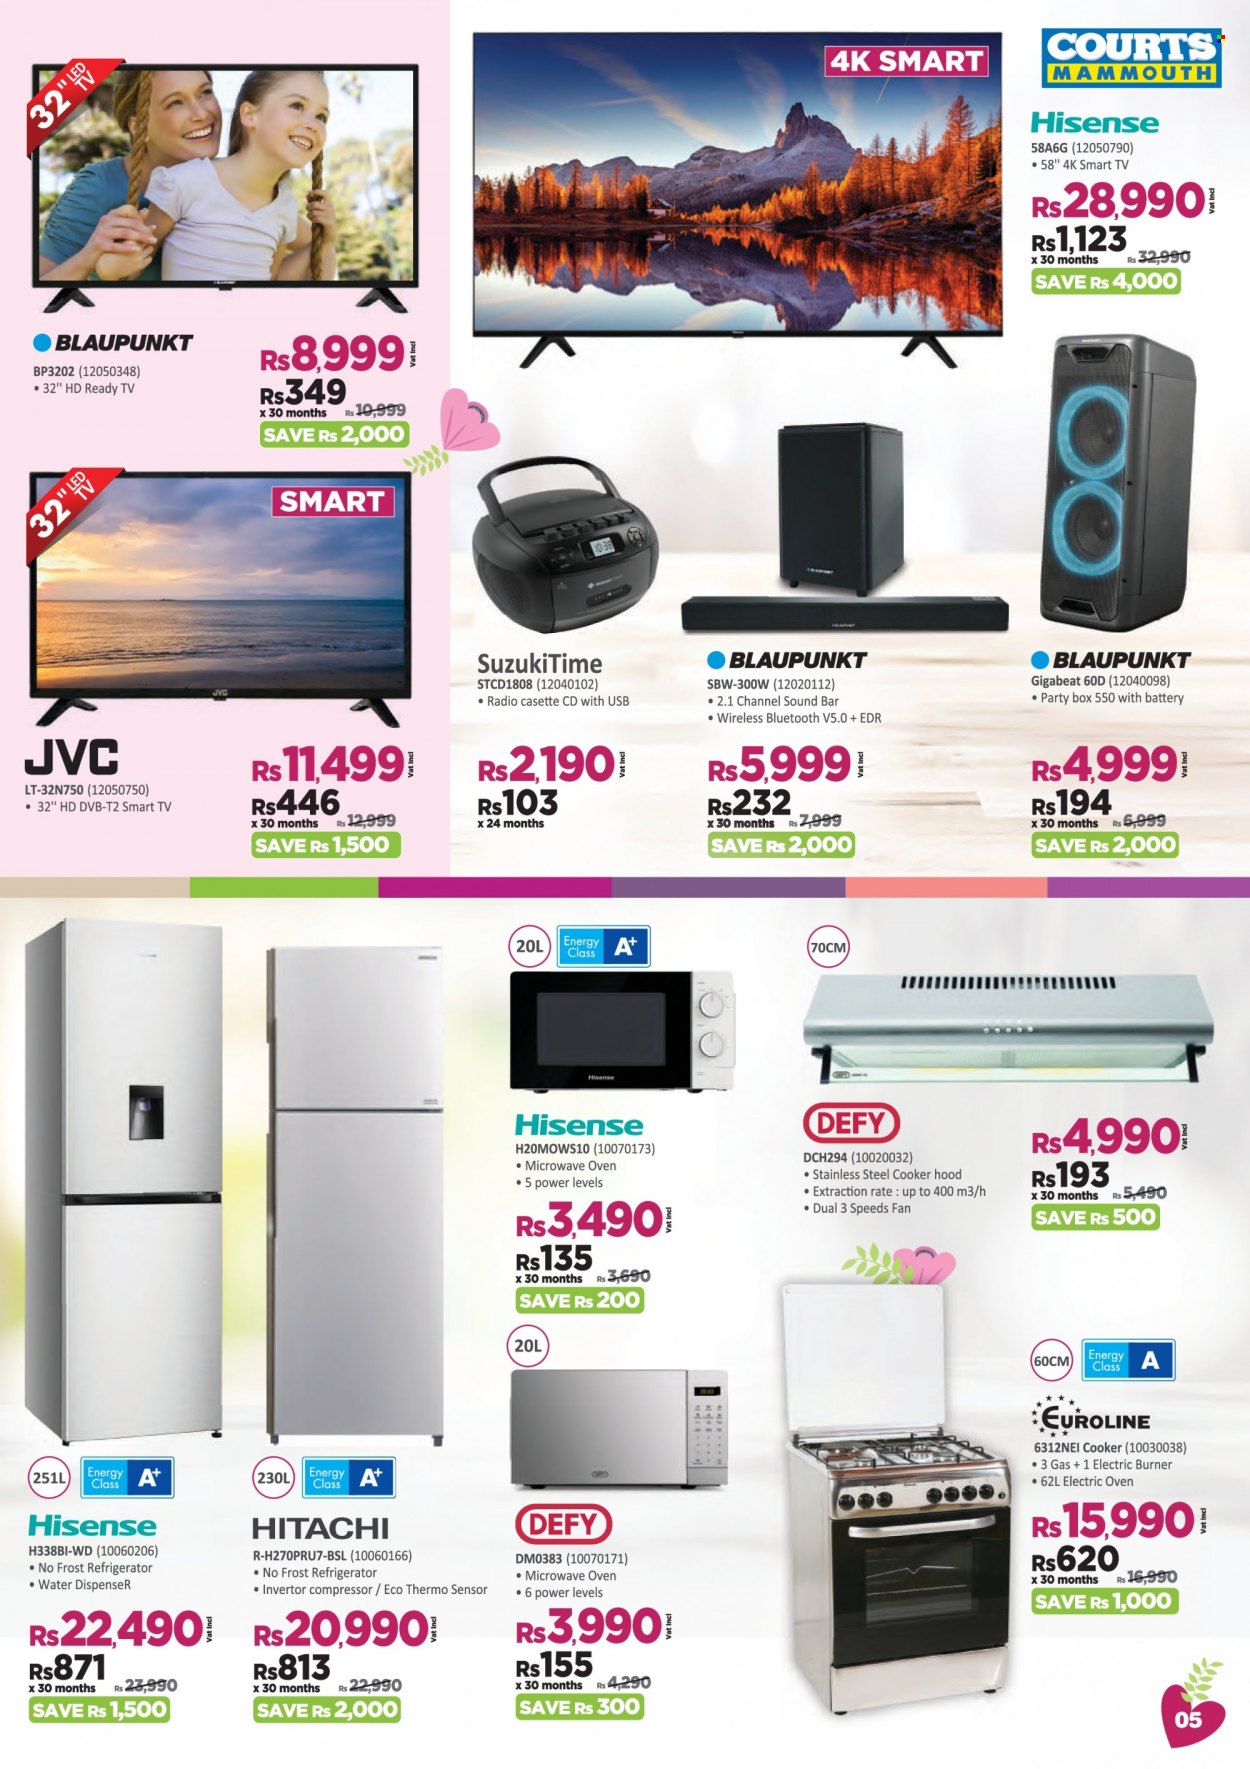 Courts Mammouth Catalogue - 1.05.2022 - 19.05.2022 - Sales products - dispenser, WD, JVC, TV, radio, sound bar, cooker hood, refrigerator, oven, microwave oven, Hitachi, water dispenser, smart tv, Hisense. Page 5.